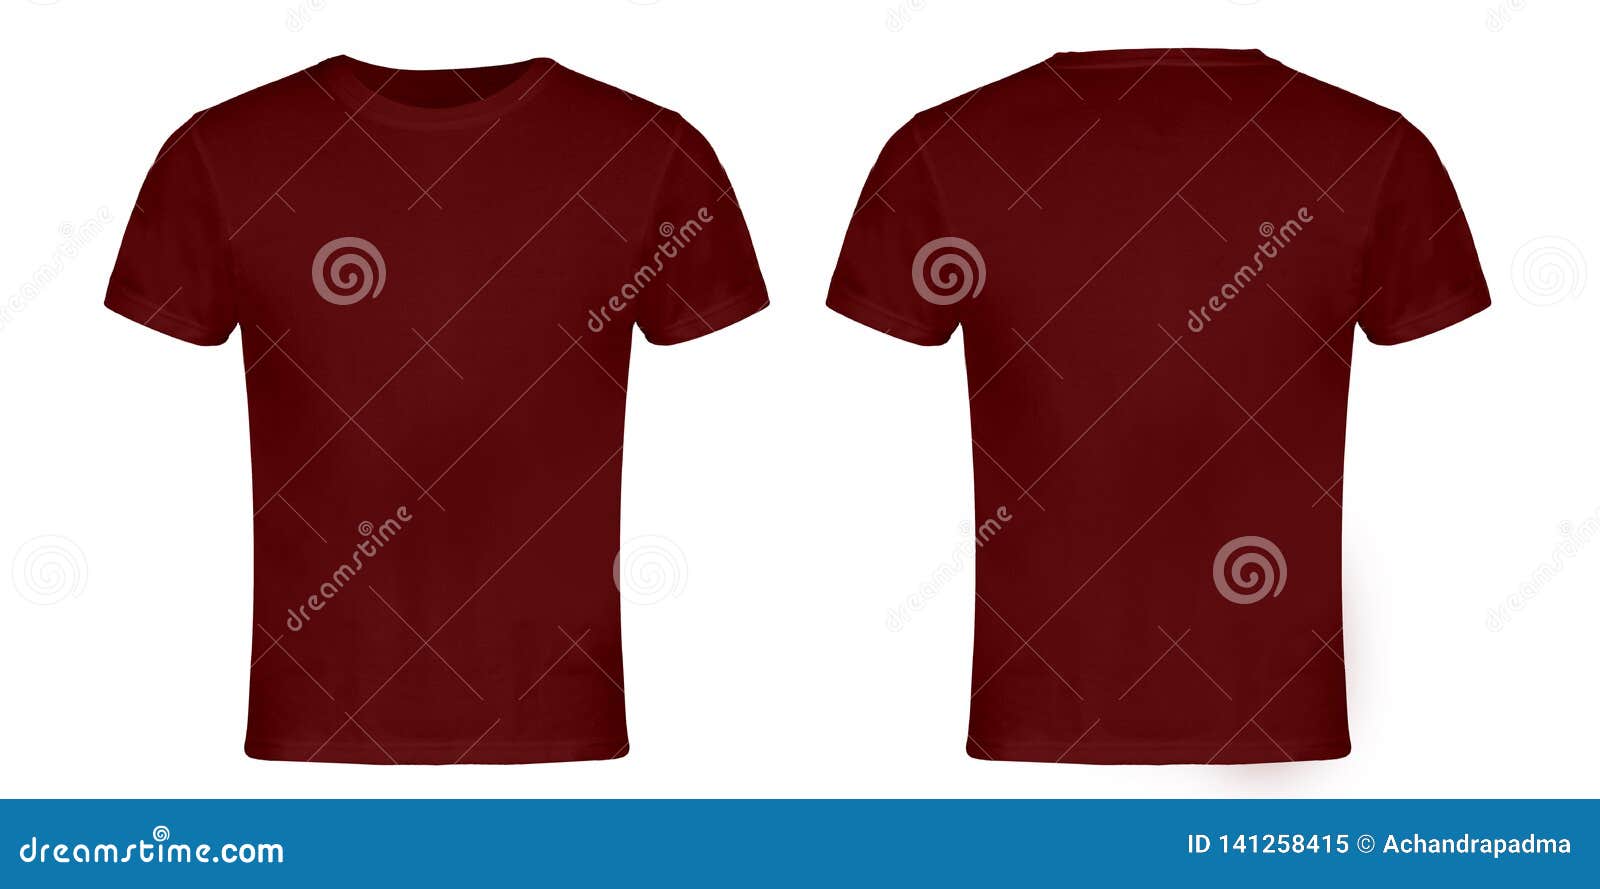 Download Red, Maroon Blank T-shirt Front And Back Stock Image ...